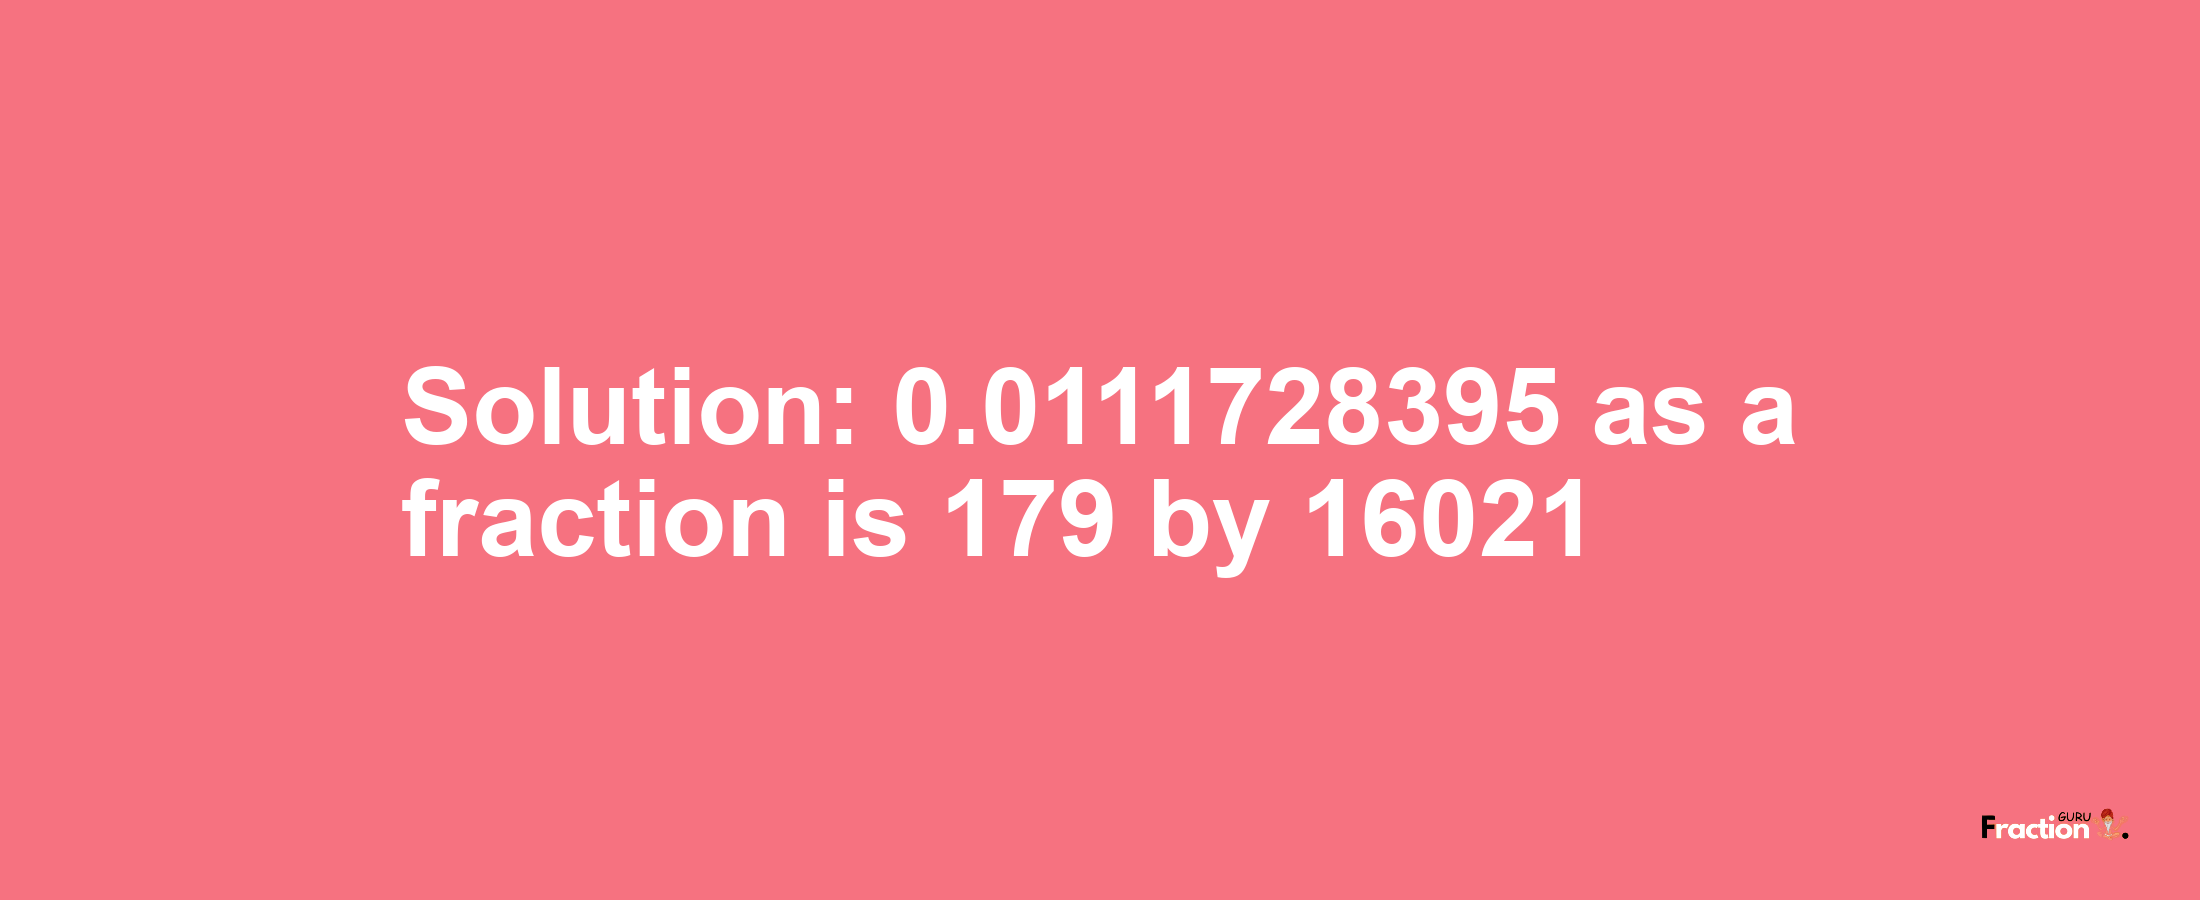 Solution:0.0111728395 as a fraction is 179/16021